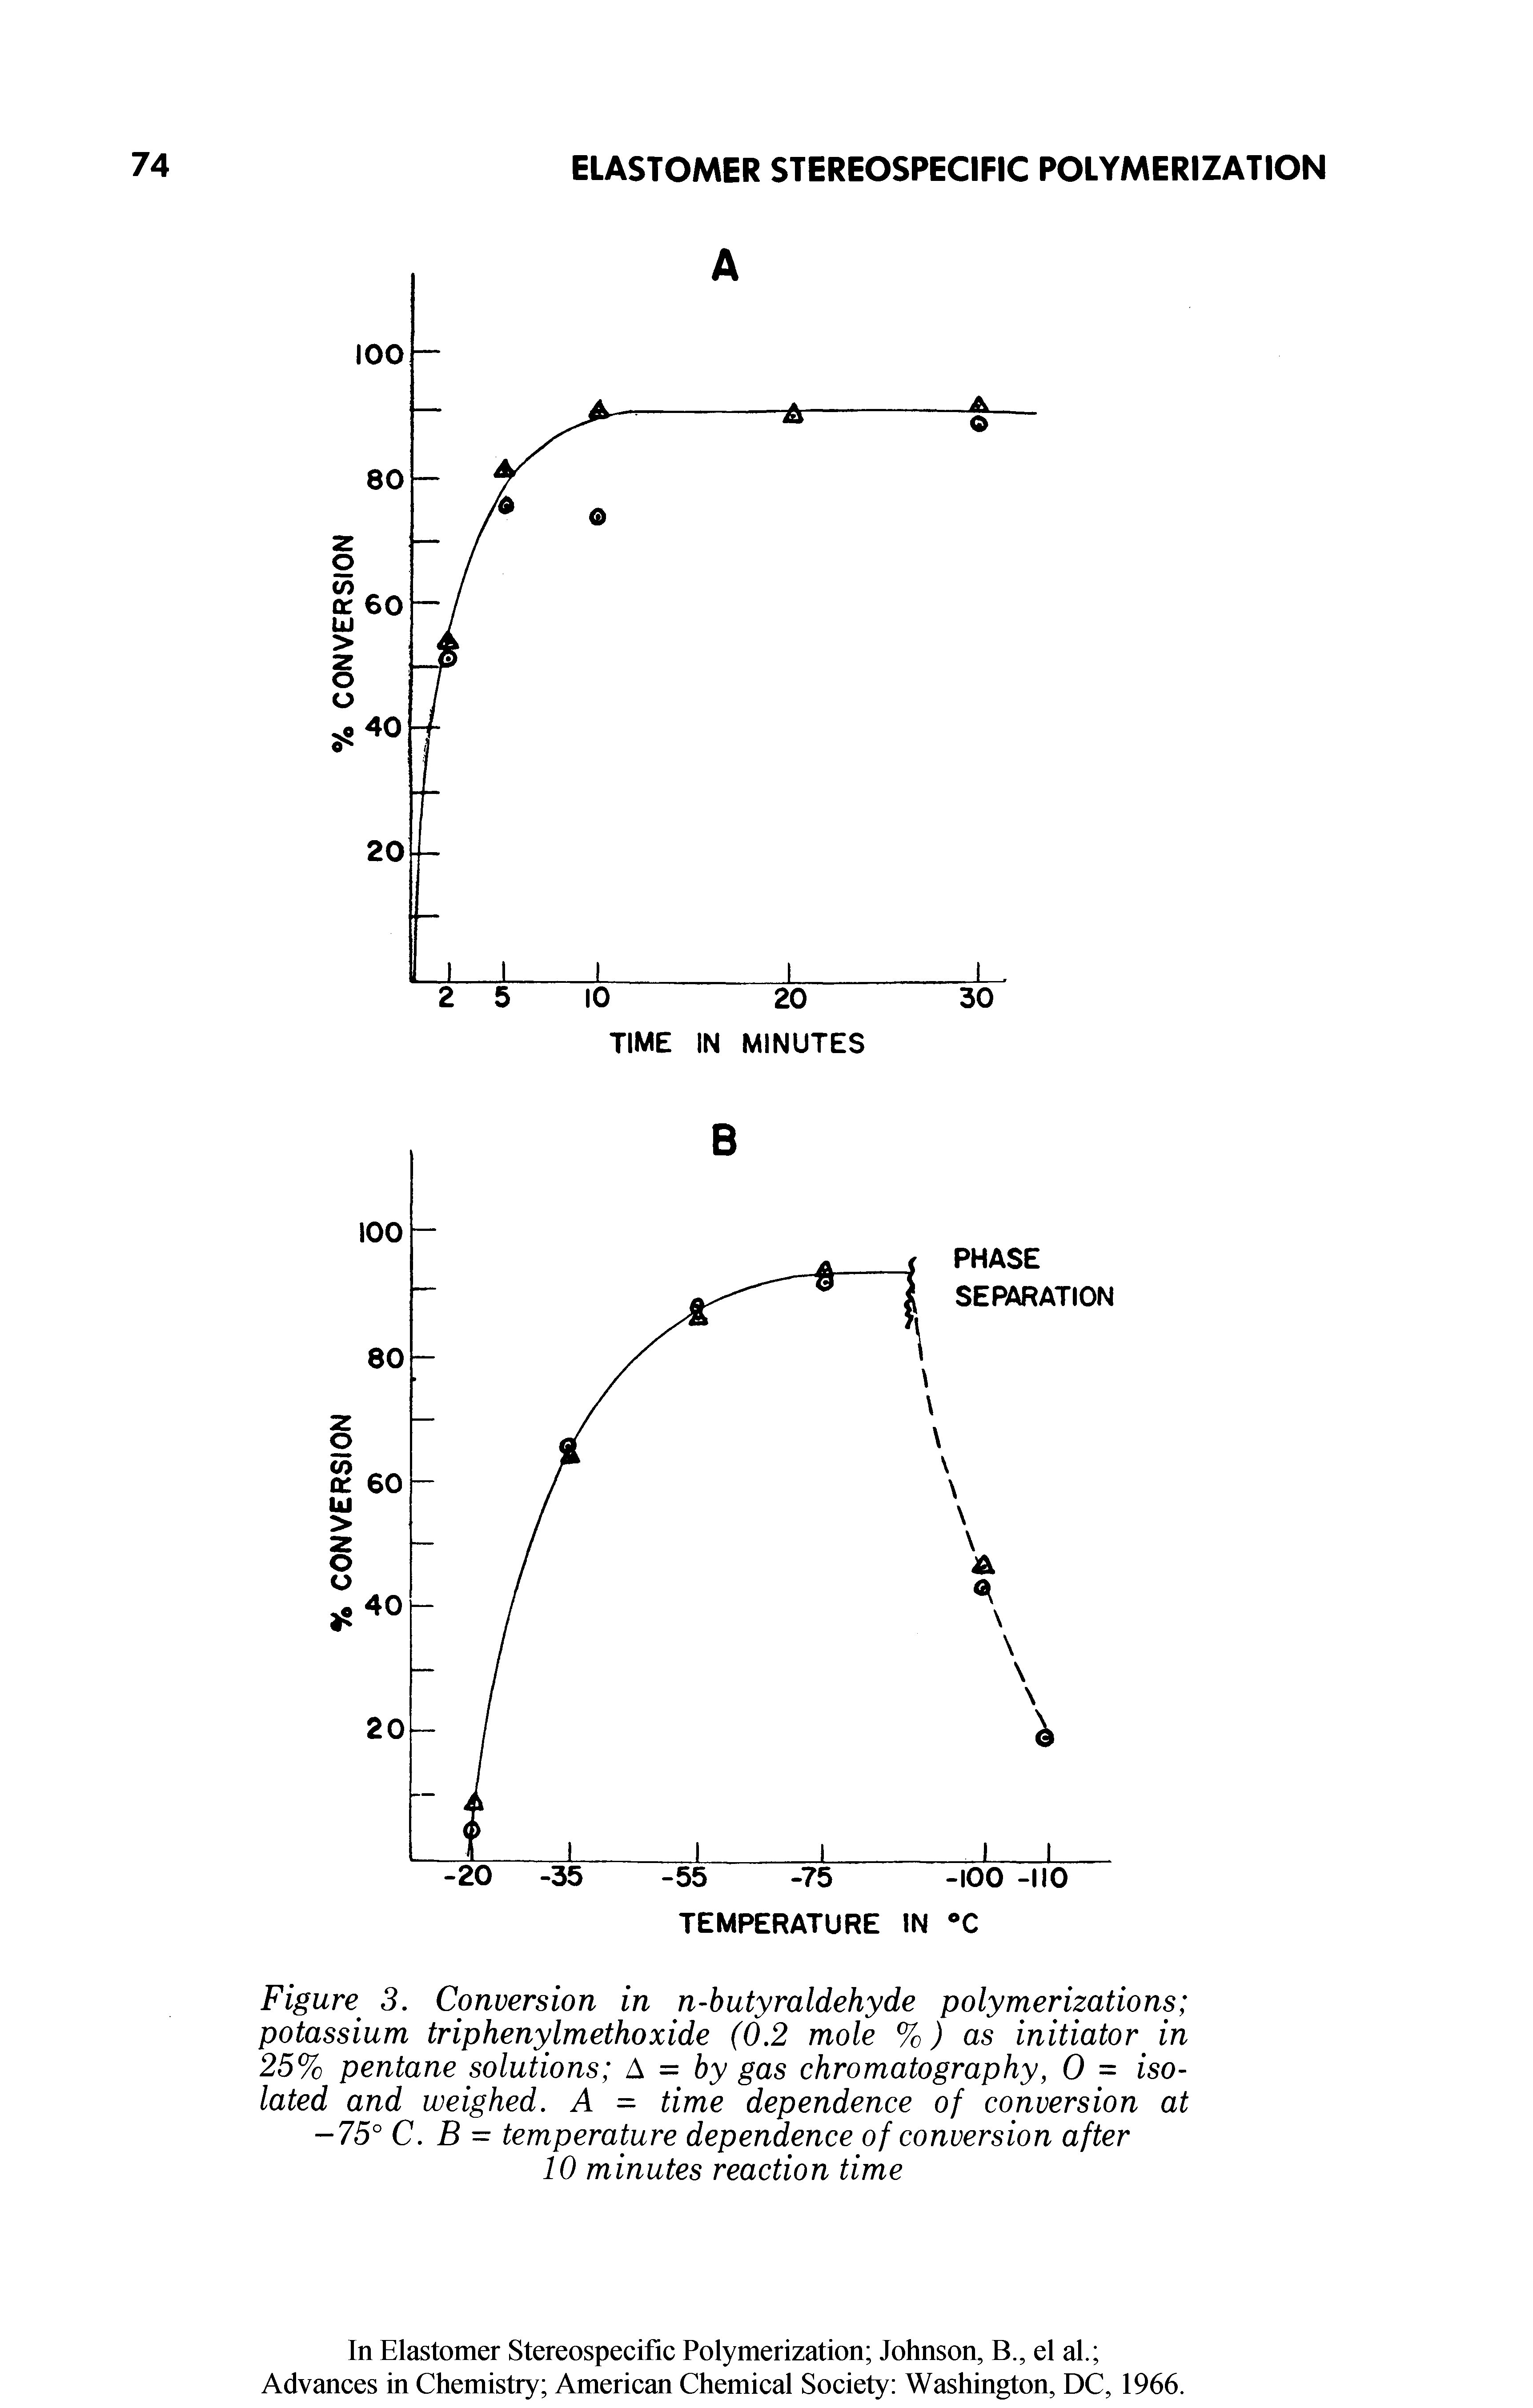 Figure 3. Conversion in n-butyraldehyde polymerizations potassium triphenylmethoxide (0.2 mole %) as initiator in 25% pentane solutions A = by gas chromatography, 0 = isolated and weighed. A = time dependence of conversion at -75° C. B = temperature dependence of conversion after 10 minutes reaction time...